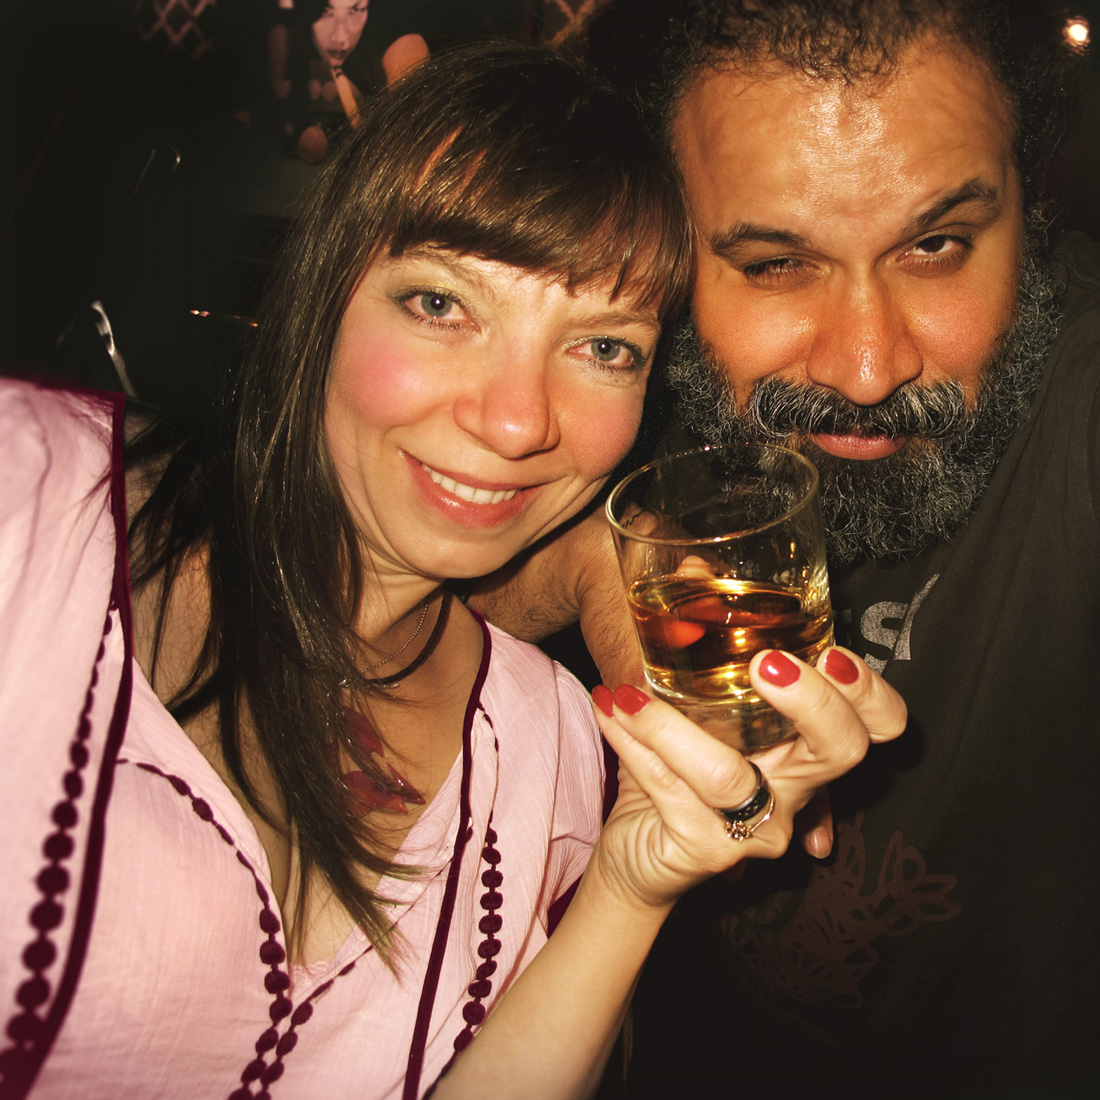 Agnieszka Drapala-Perrotta and William Fuentes are Whisky Wolves under the full moon